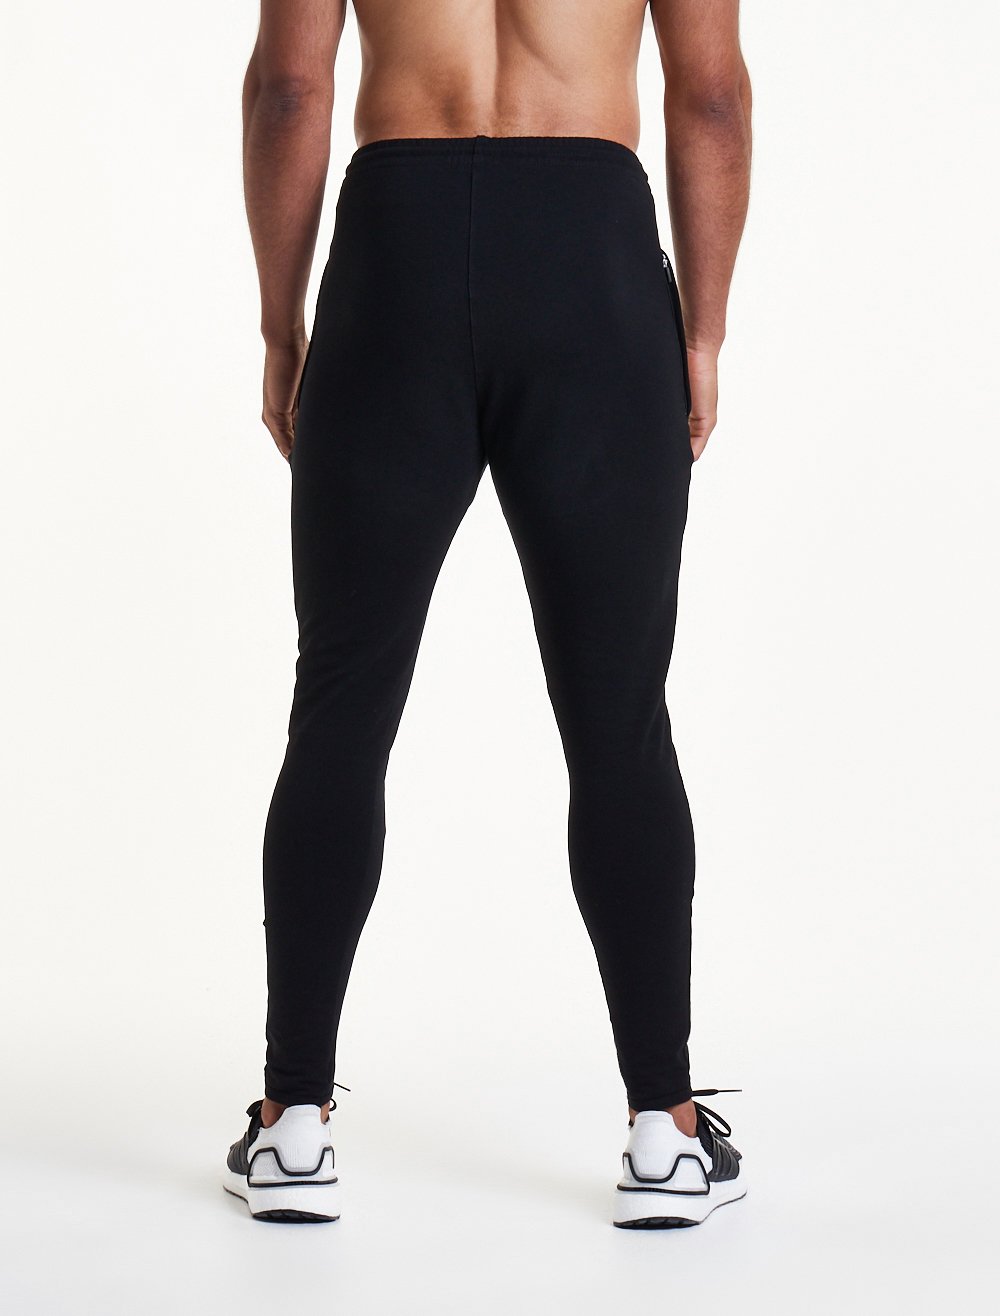 Pro-Fit Tapered Bottoms / Triple Black Pursue Fitness 8